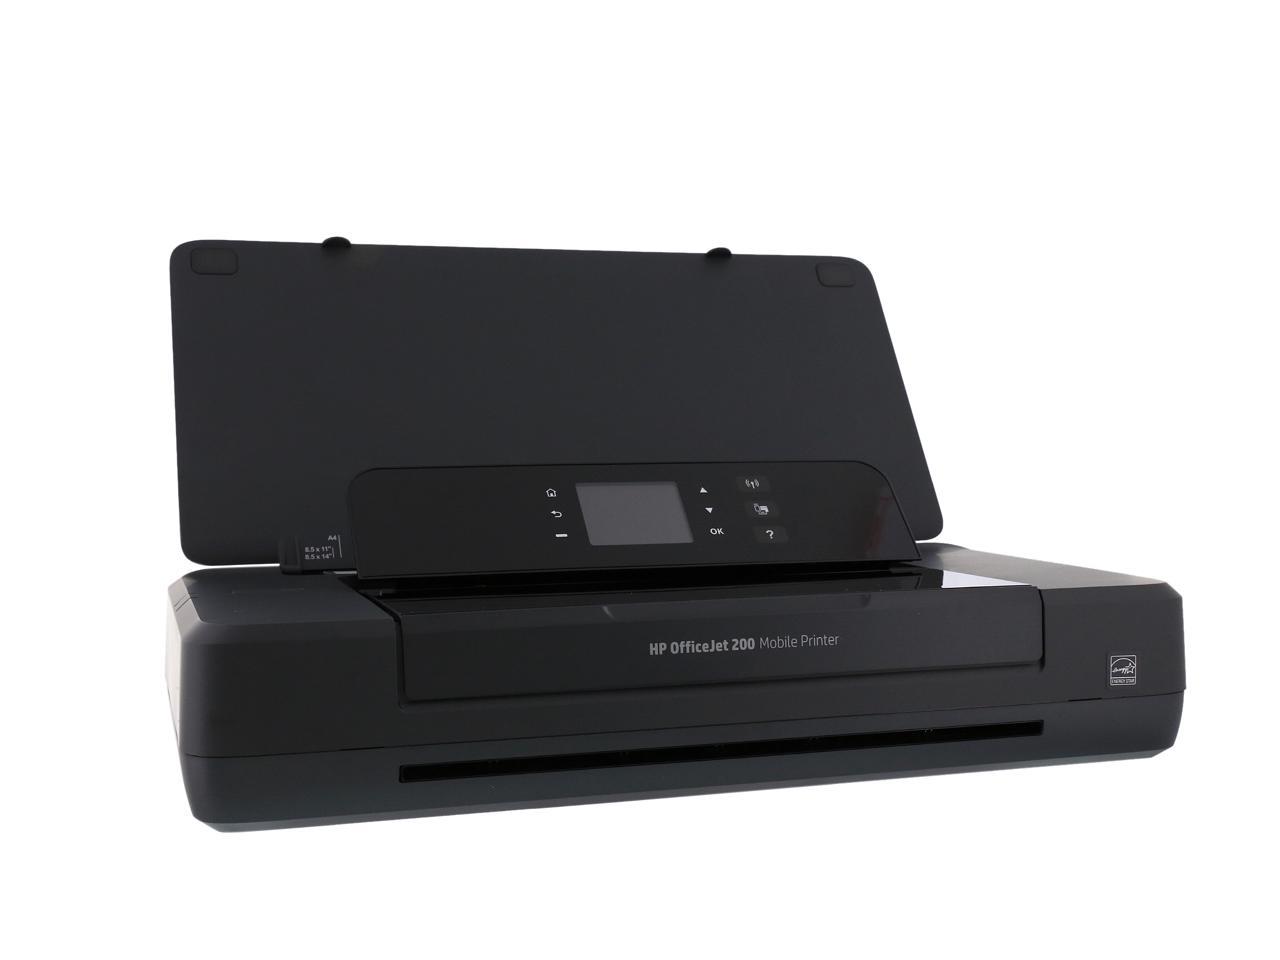 Hp Officejet 200 Mobile Series Printer Driver : Now this review unit